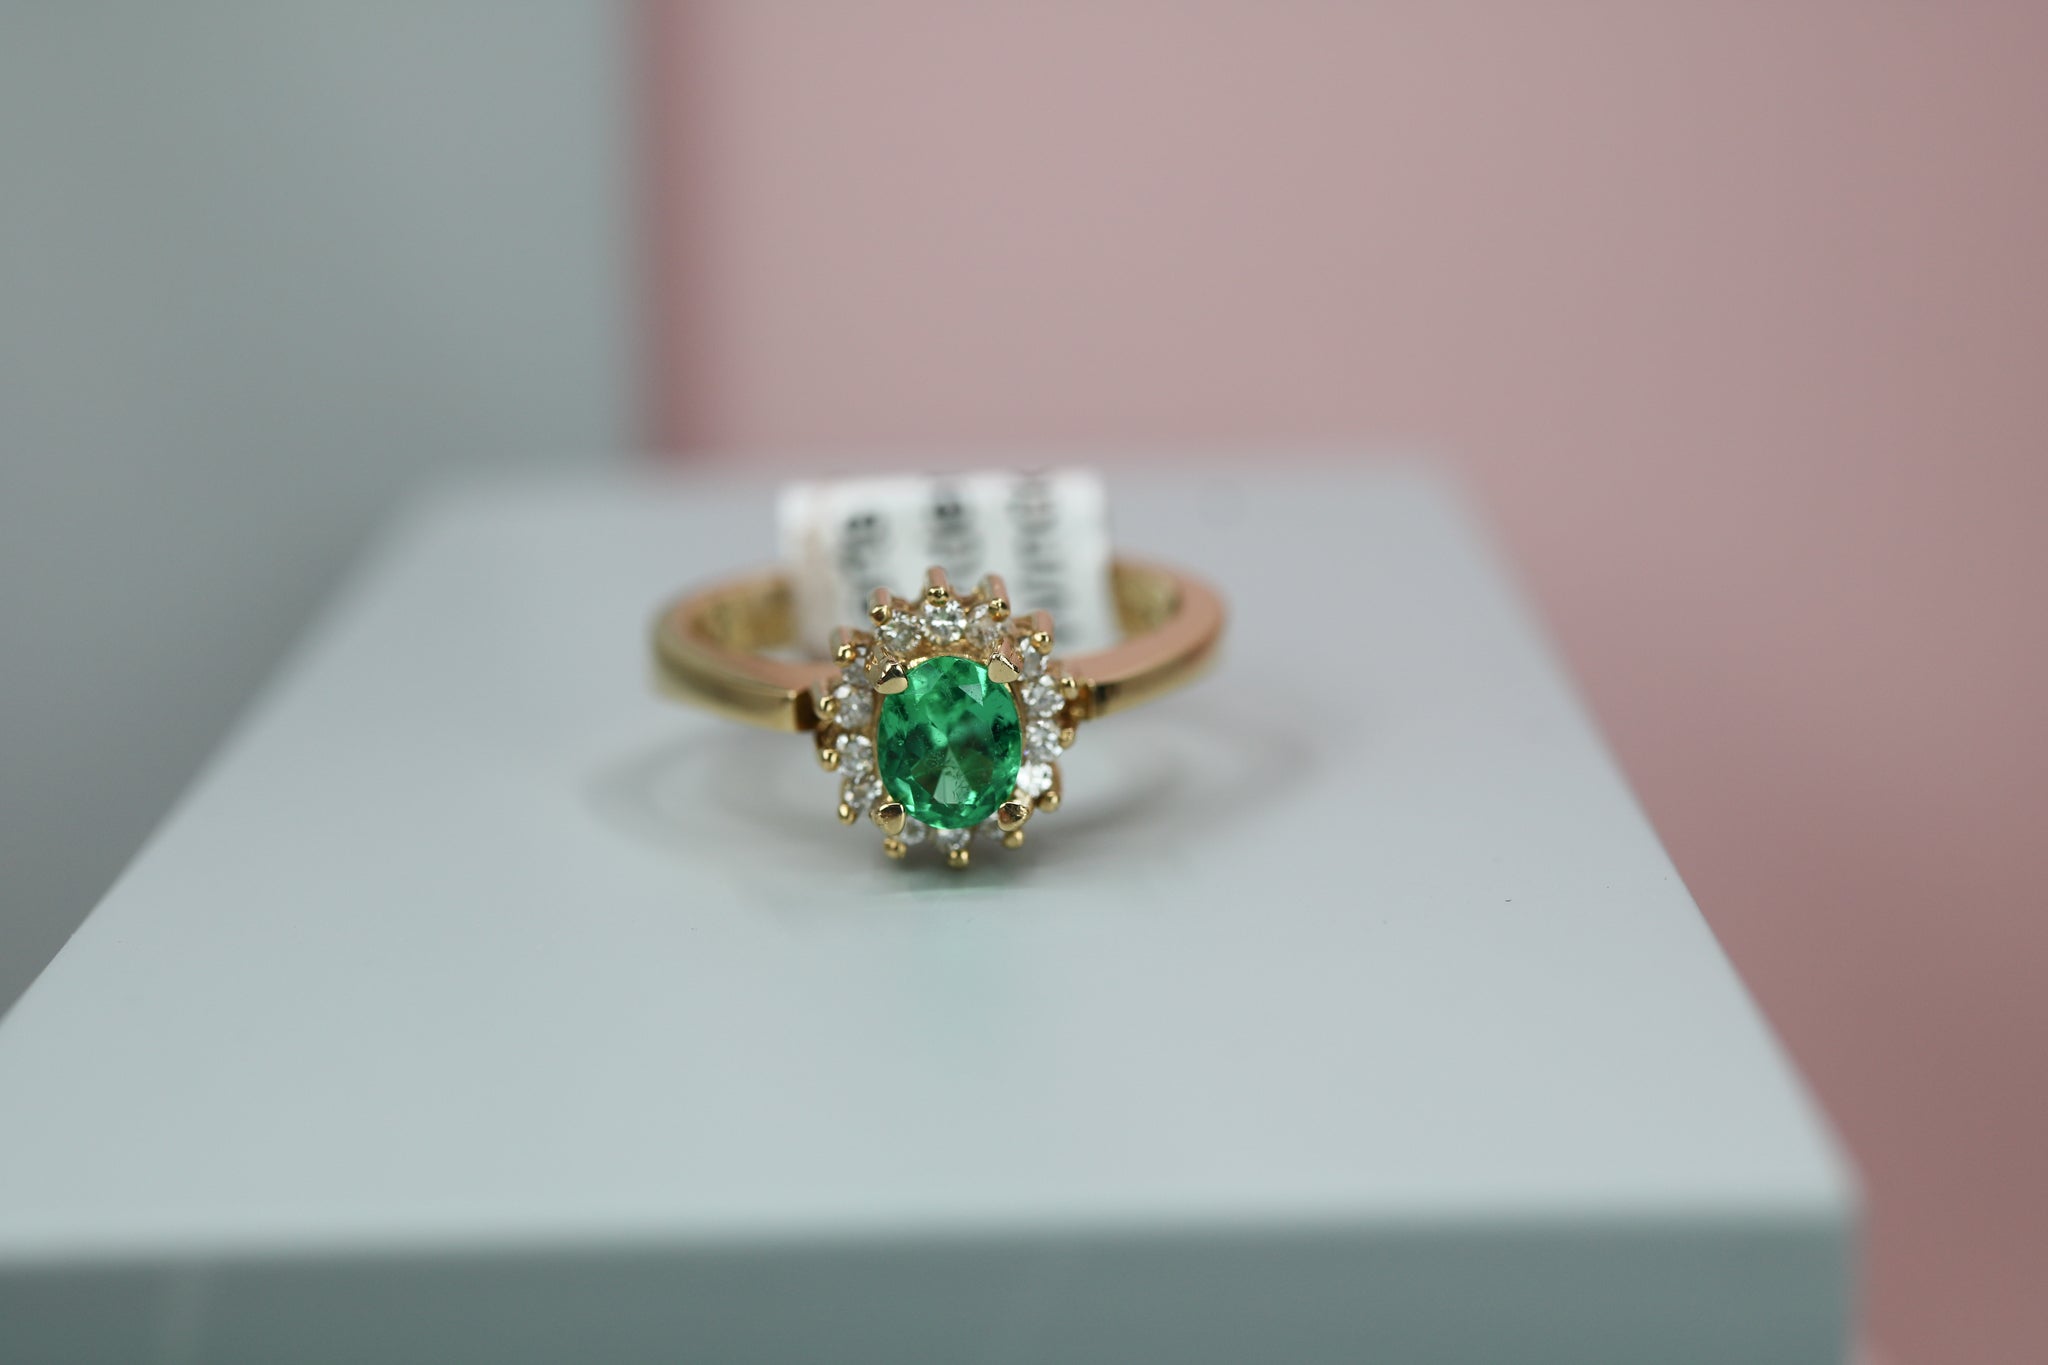 14ct Yellow Gold Emerald & Diamond Ring - HJ2066 - Hallmark Jewellers Formby & The Jewellers Bench Widnes